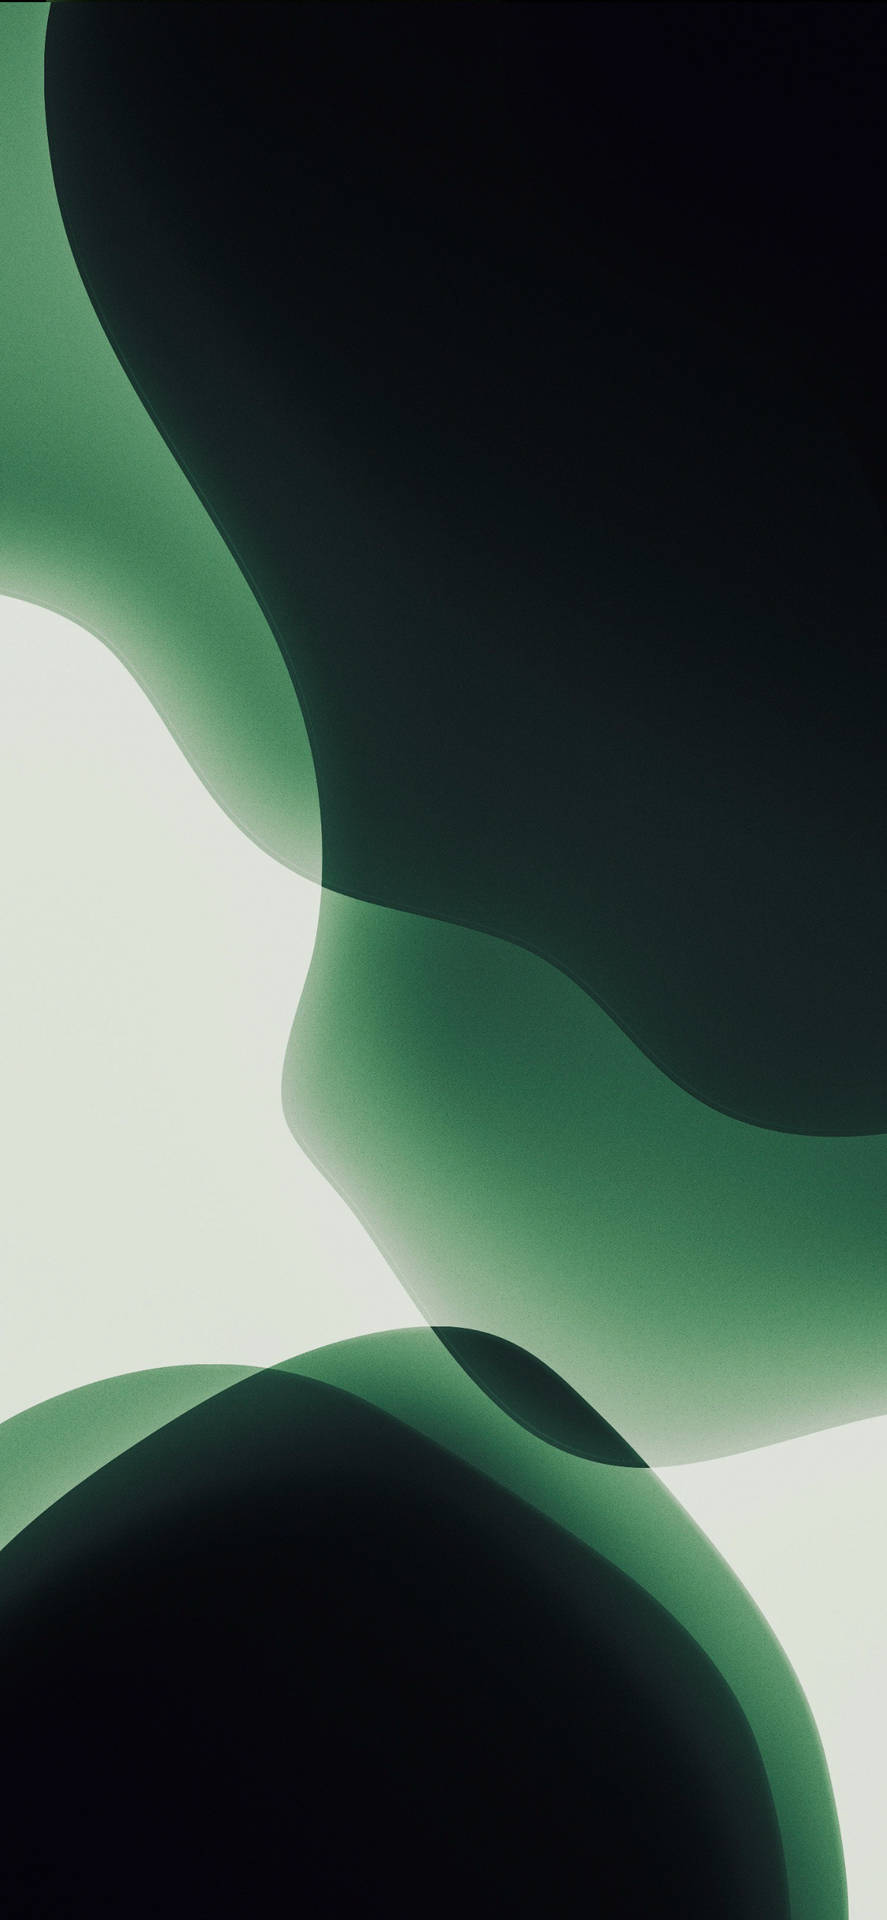 Abstract Art With Curves Green iPhone Wallpaper